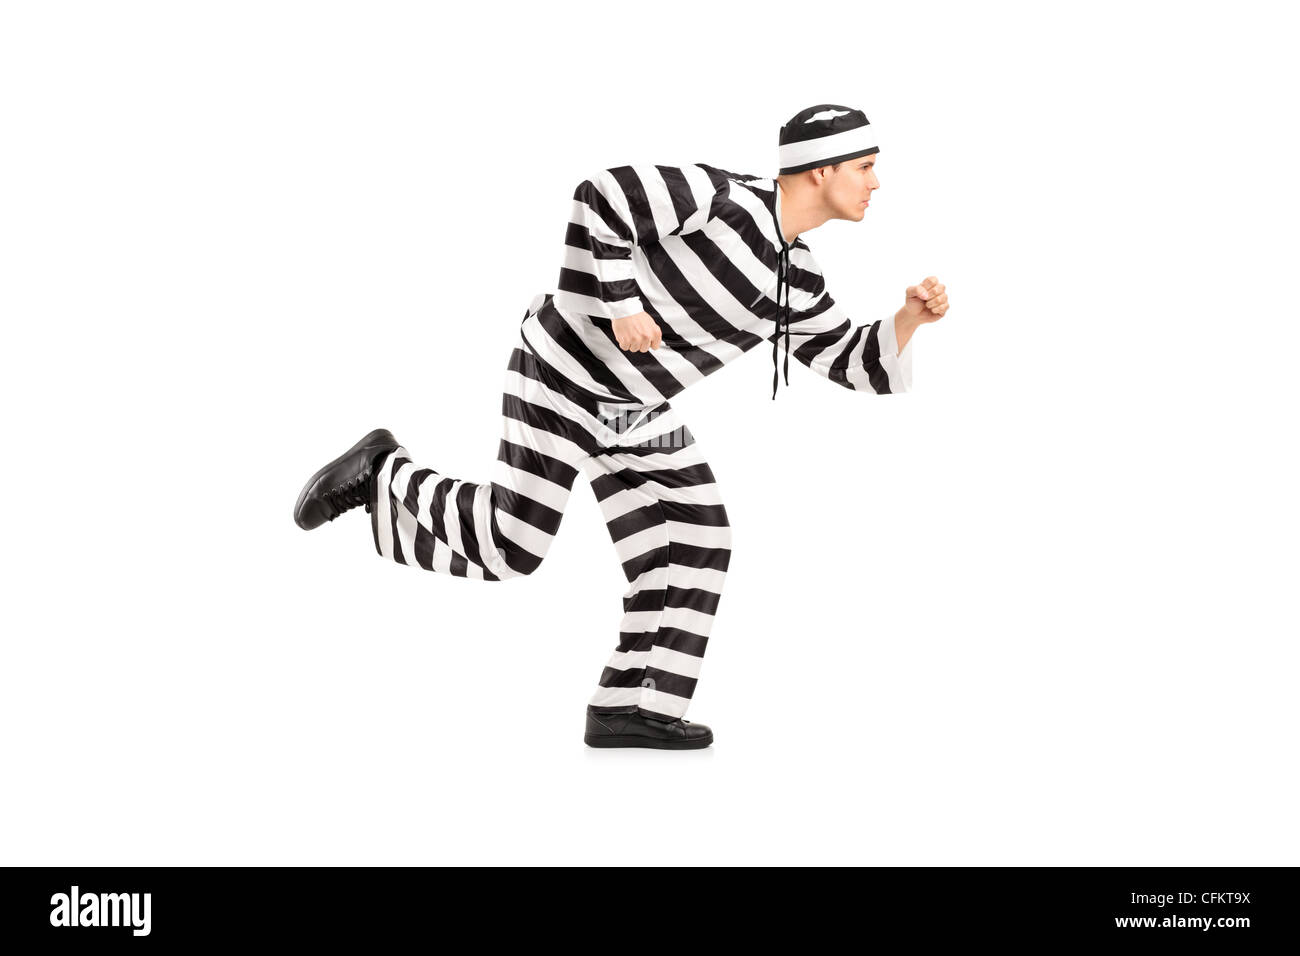 Full length portrait of a prisoner escaping isolated on white background Stock Photo